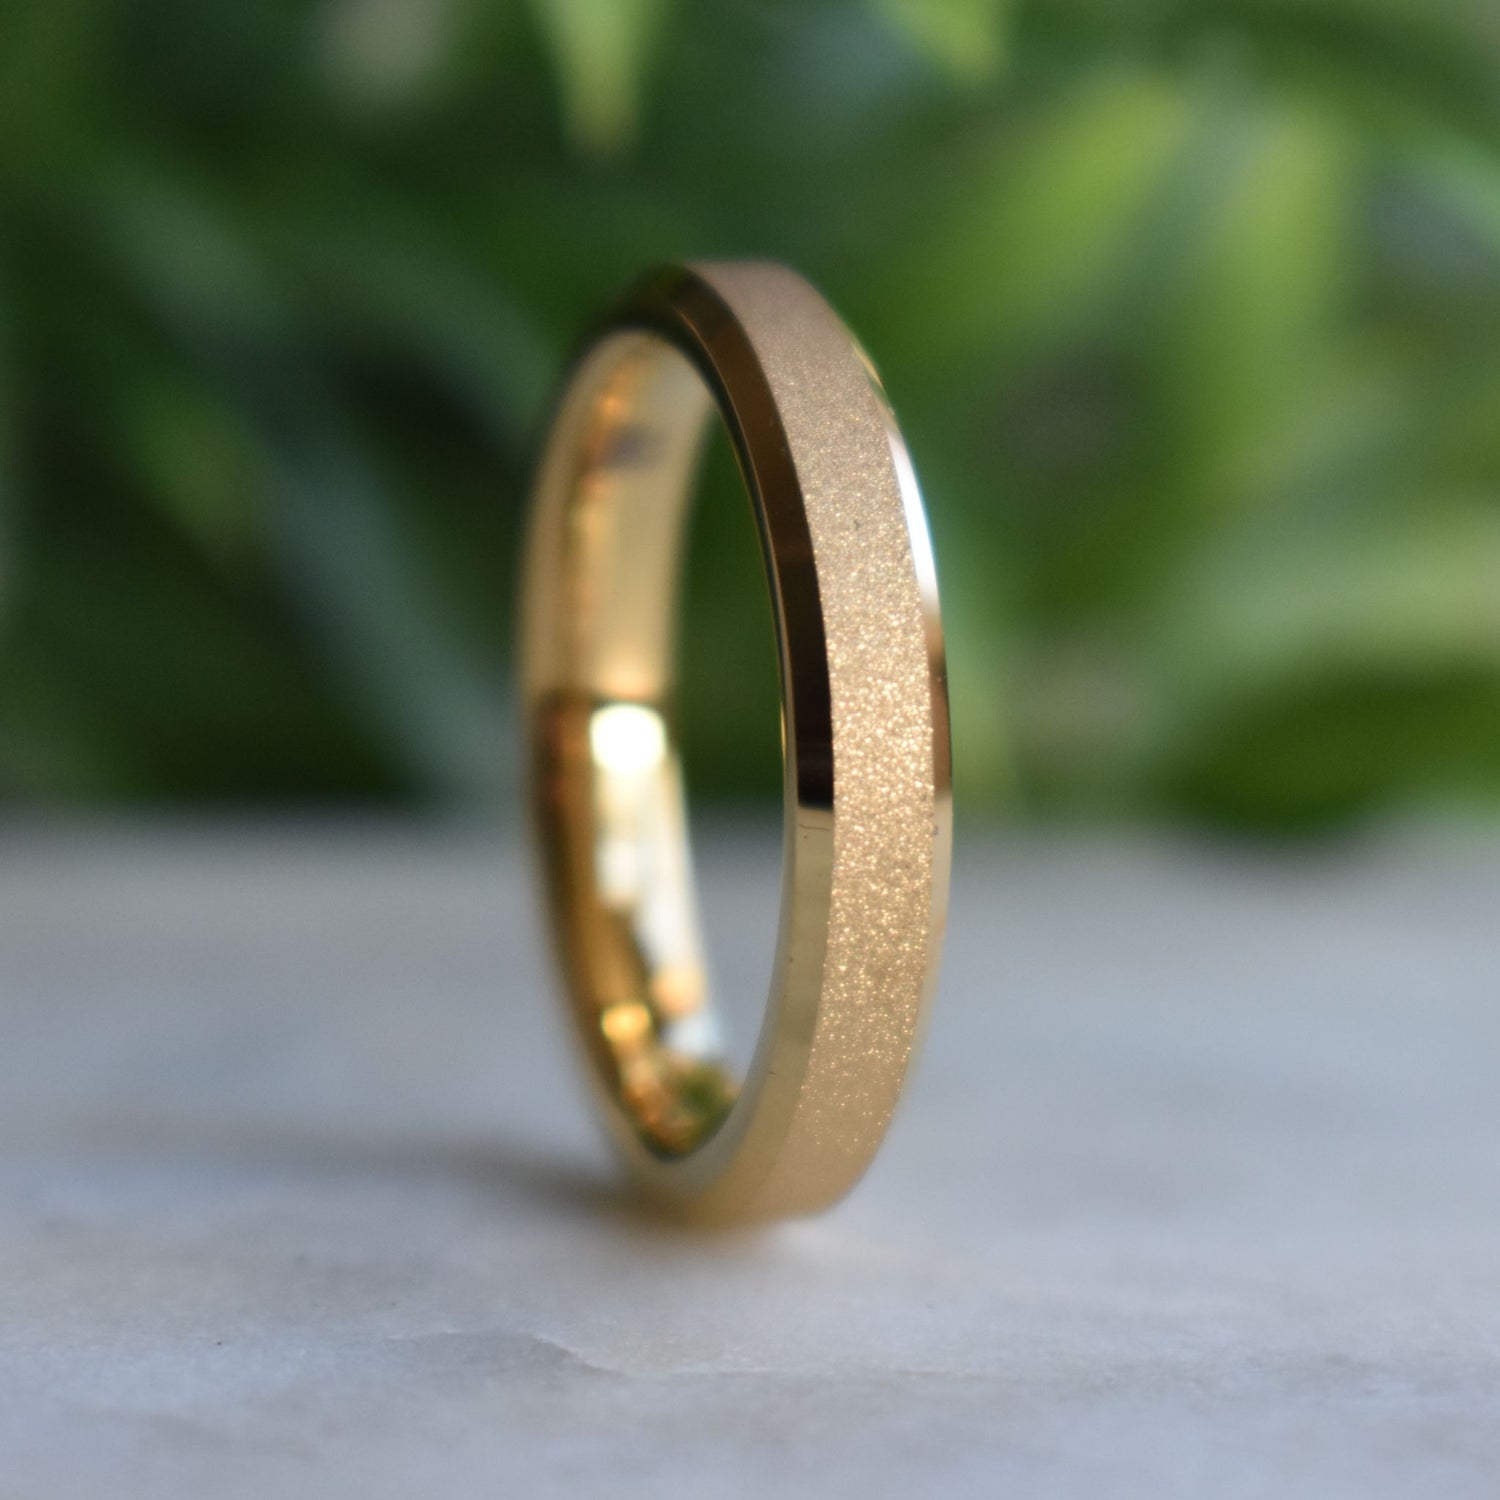 Recycled gold brought back to life – McCaul